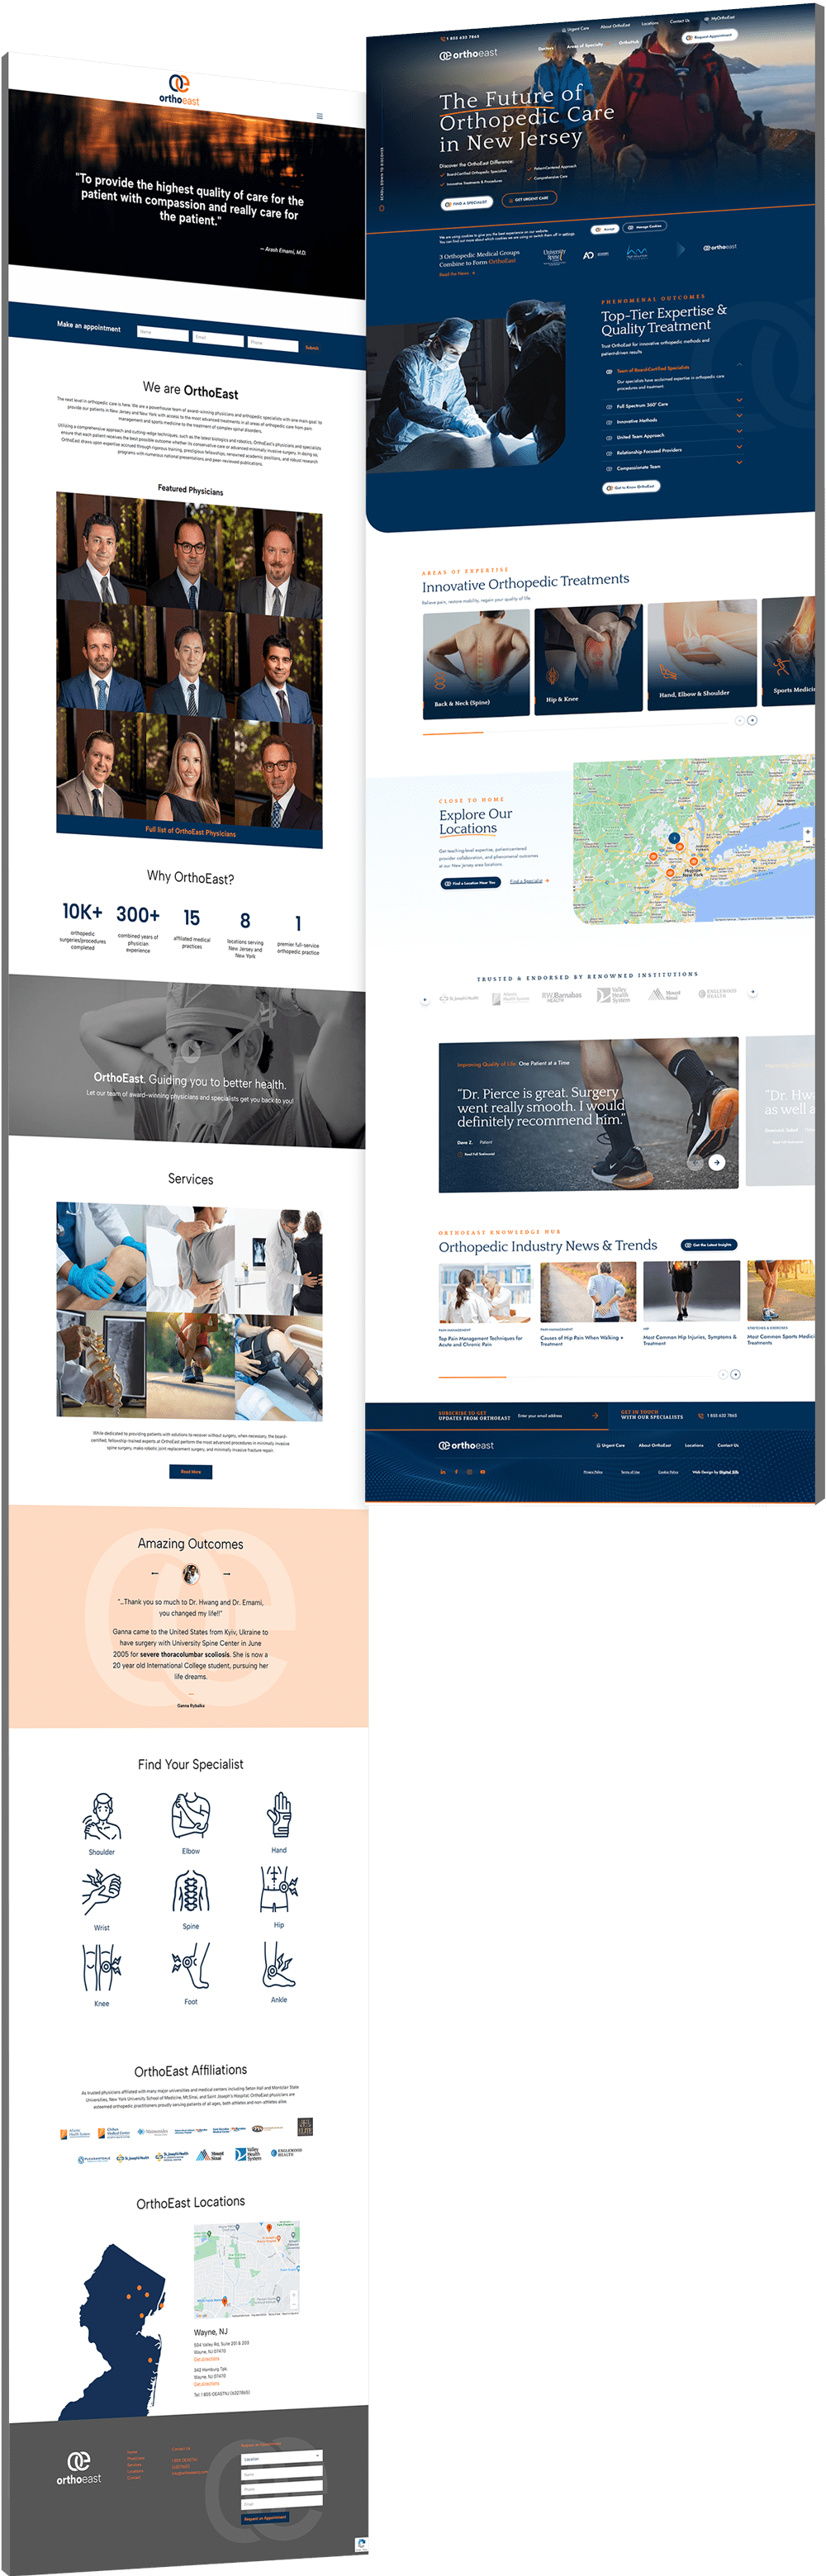 Before and after of OrthoEast's web design